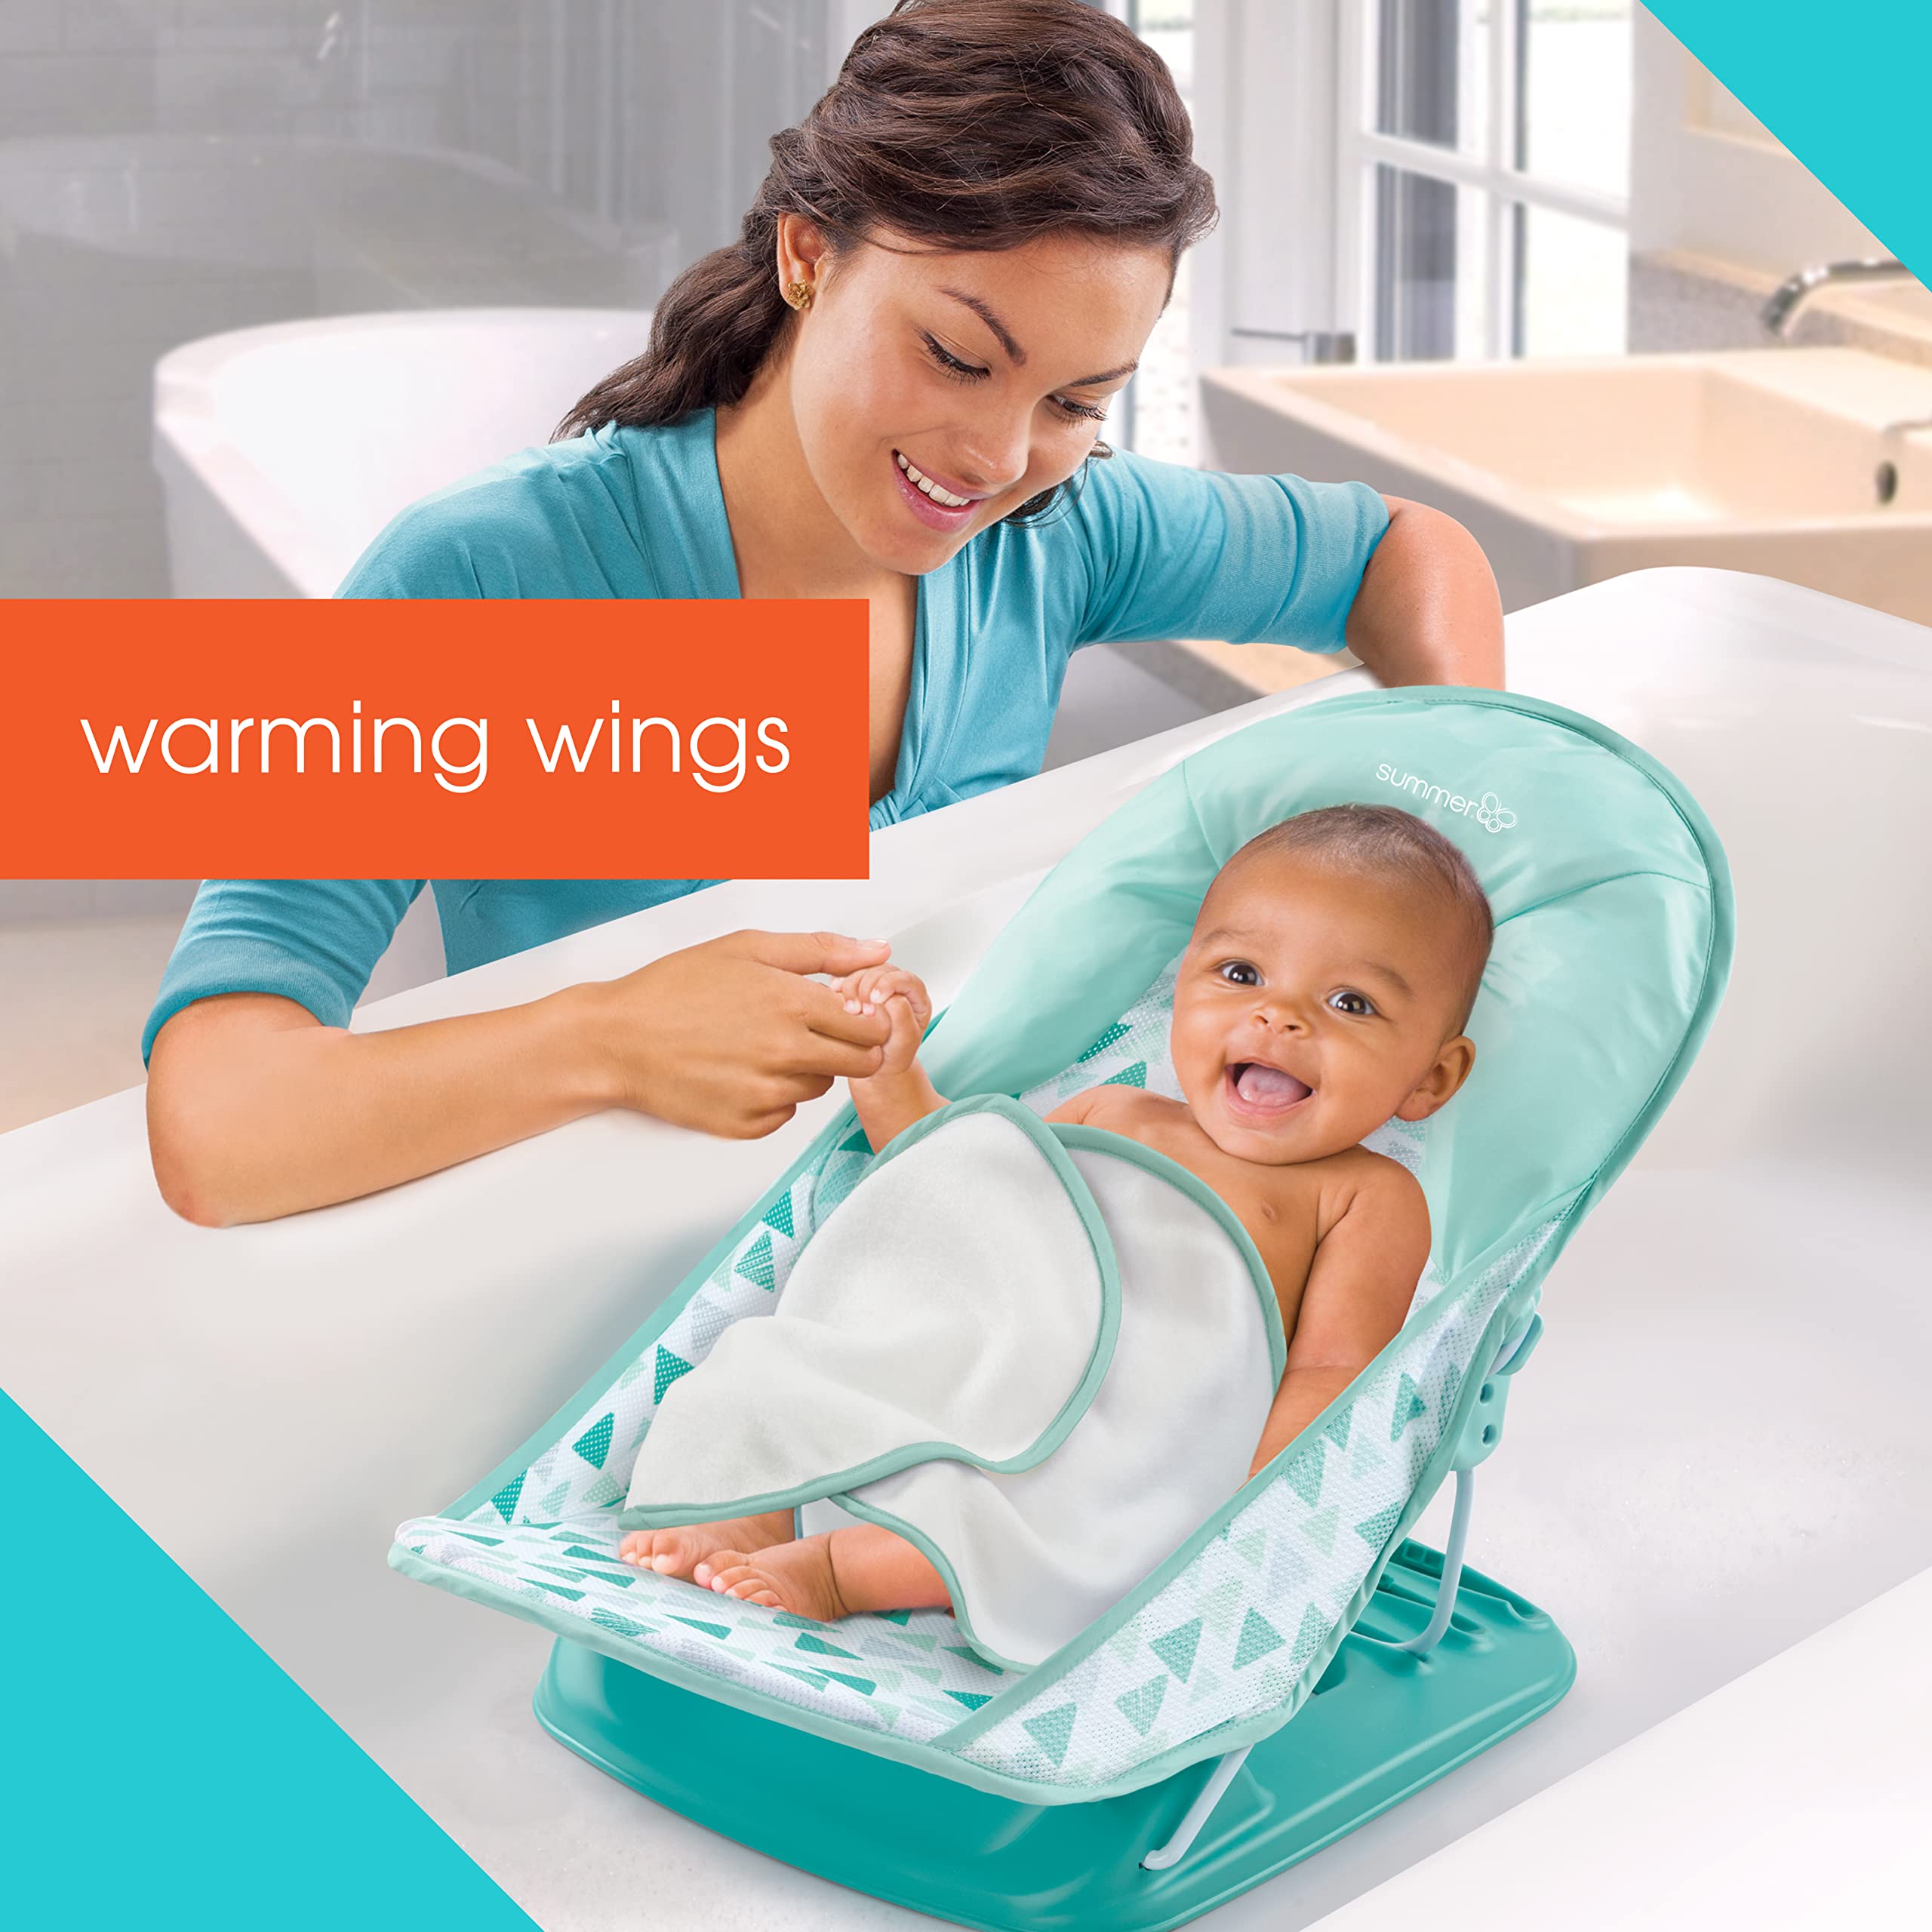 Summer Baby Bather Folding Bath Sling With Warming Wings (Green Triangle) - Bath Support for Use in the Sink or Adult Tub